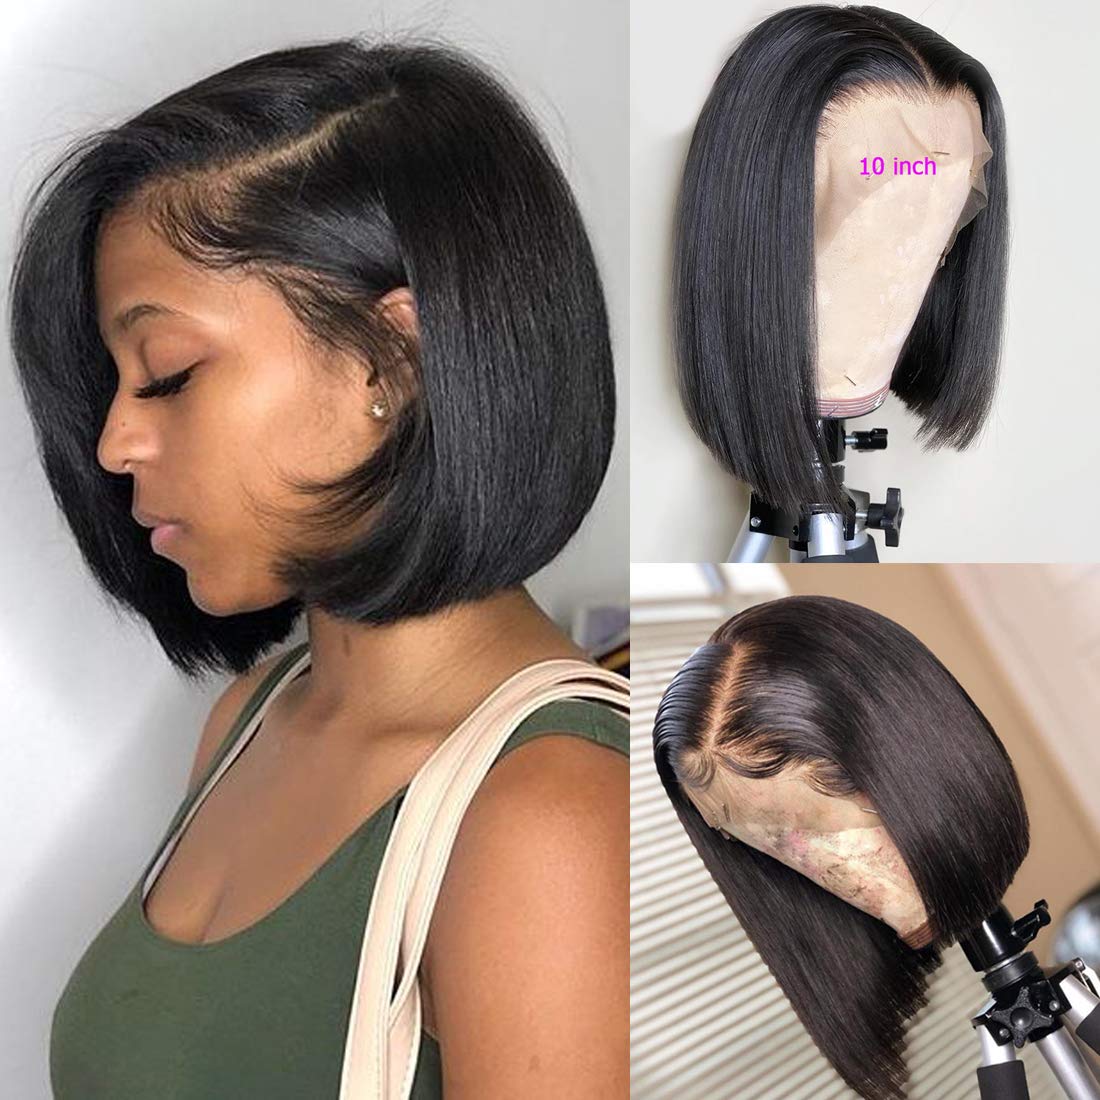 Price:$61.99     BLY Short Straight Bob Wigs Brazilian Virgin Human Hair Lace Front Wigs Human Hair (8 inch) 13x4 Lace Part 150% Density Pre Plucked with Baby Hair   Beauty